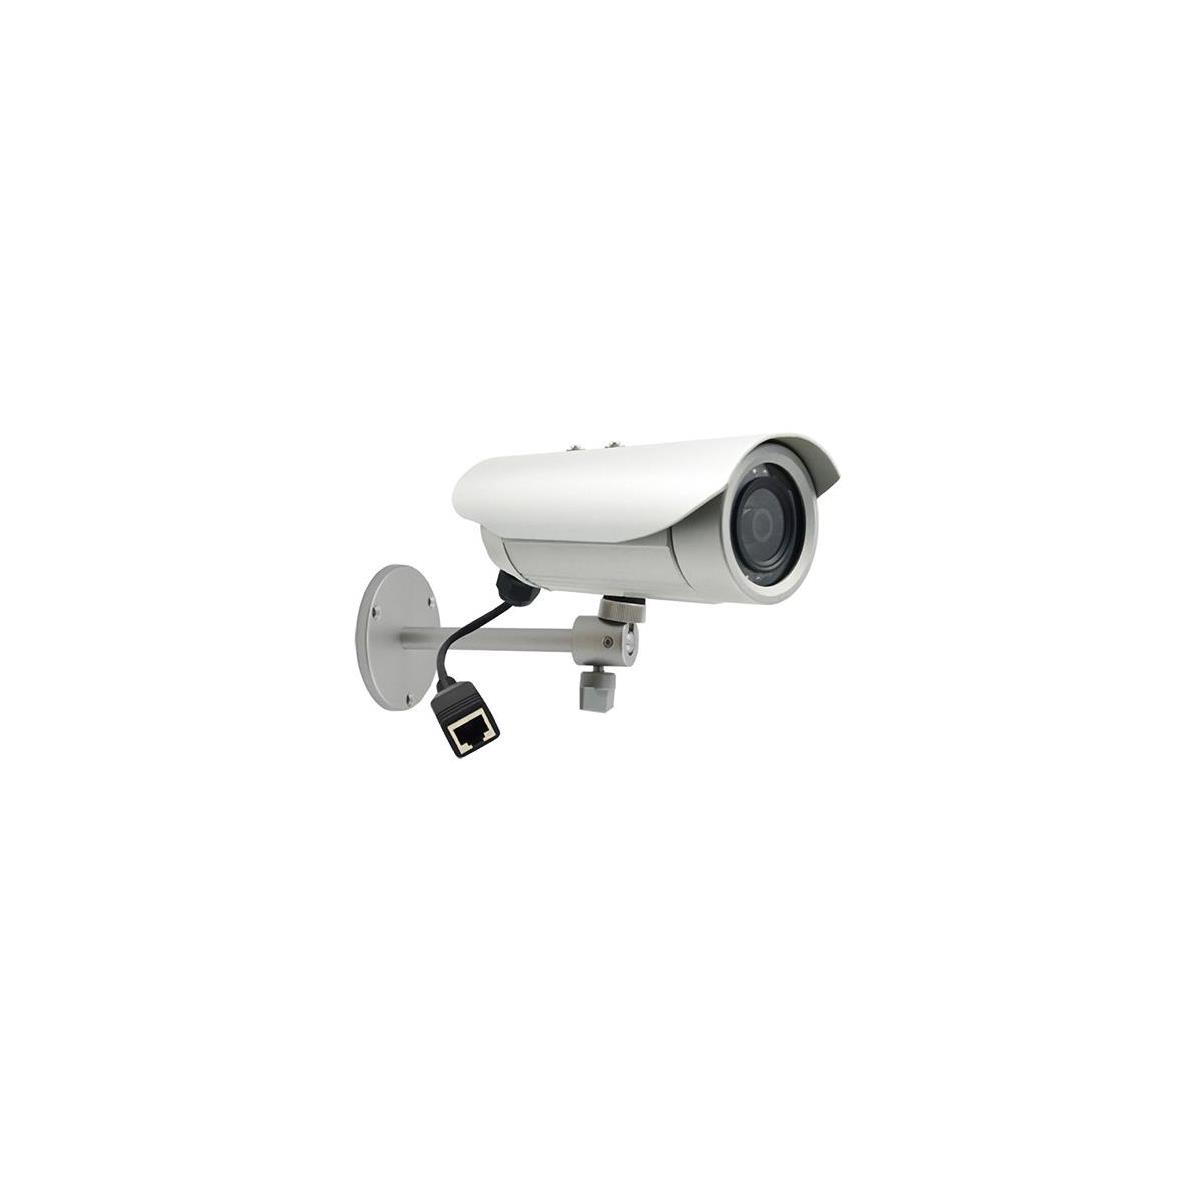 Image of ACTi E32A Day/Night Outdoor IP Bullet Camera